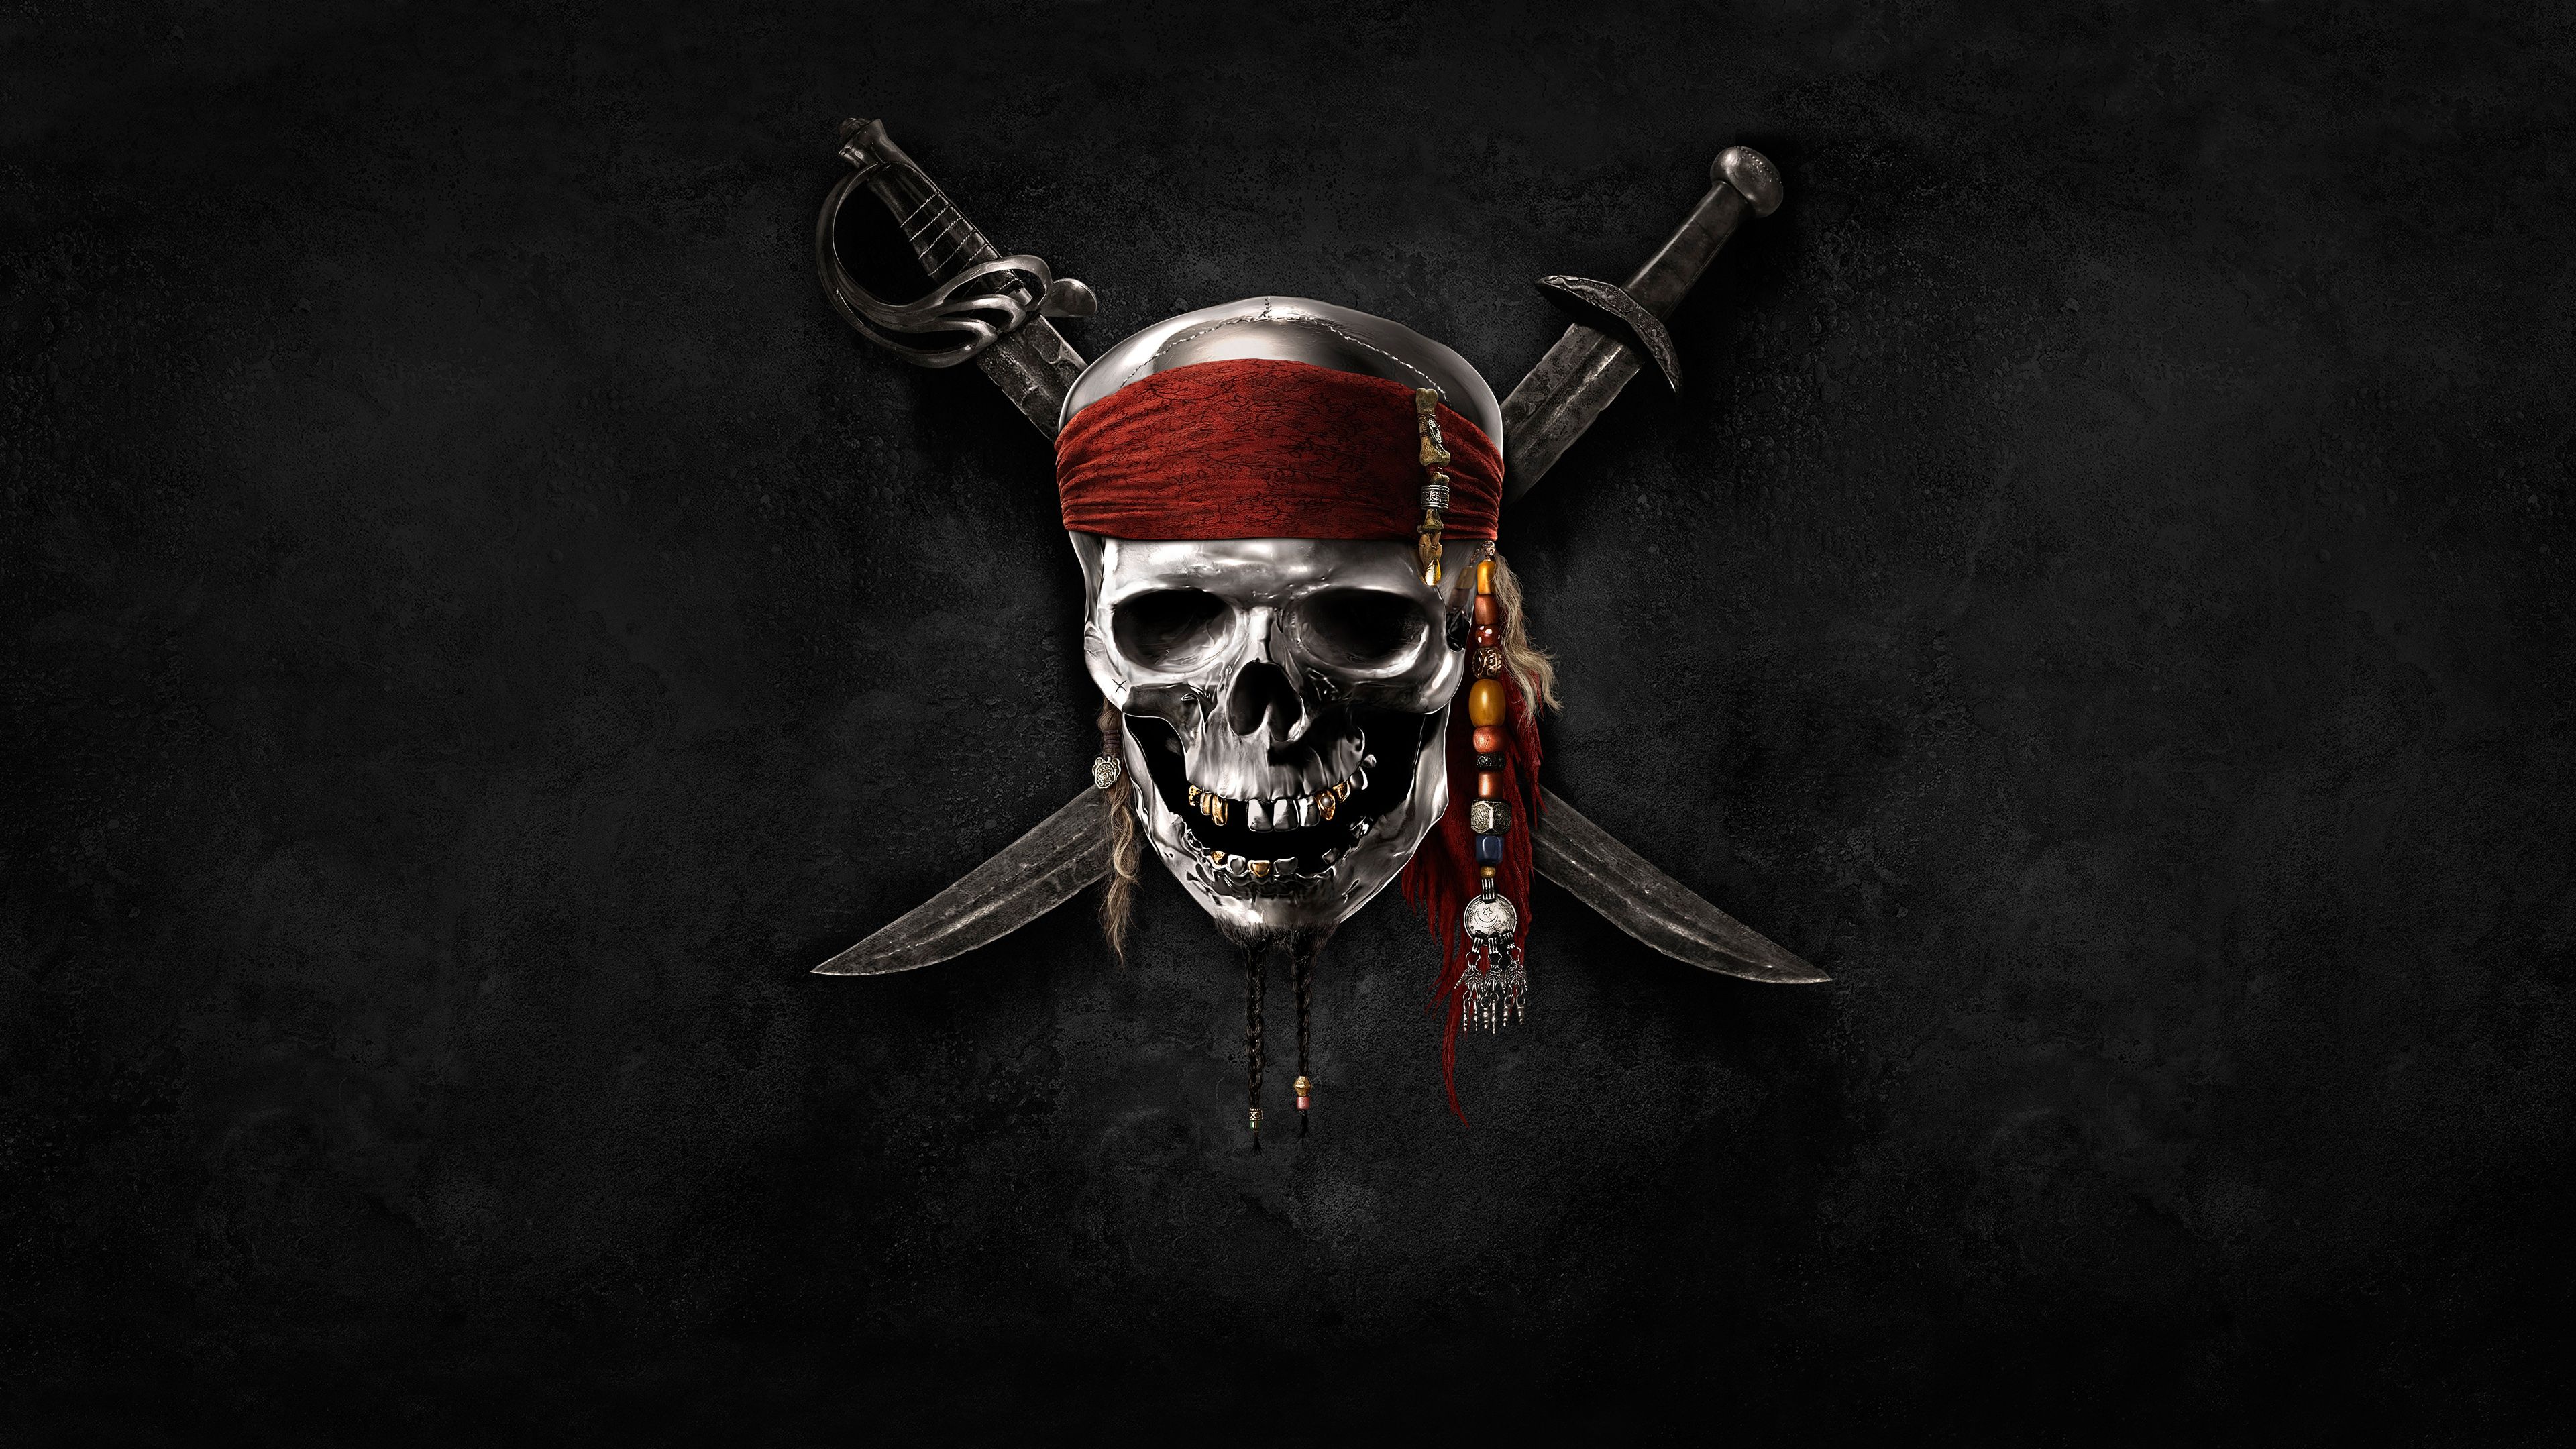 Free download Pirates Of The Caribbean 4k Ultra HD Wallpaper Background Image [3840x2160] for your Desktop, Mobile & Tablet. Explore Pirates Wallpaper. Pirates Wallpaper, Pirates Wallpaper, Pirates Background